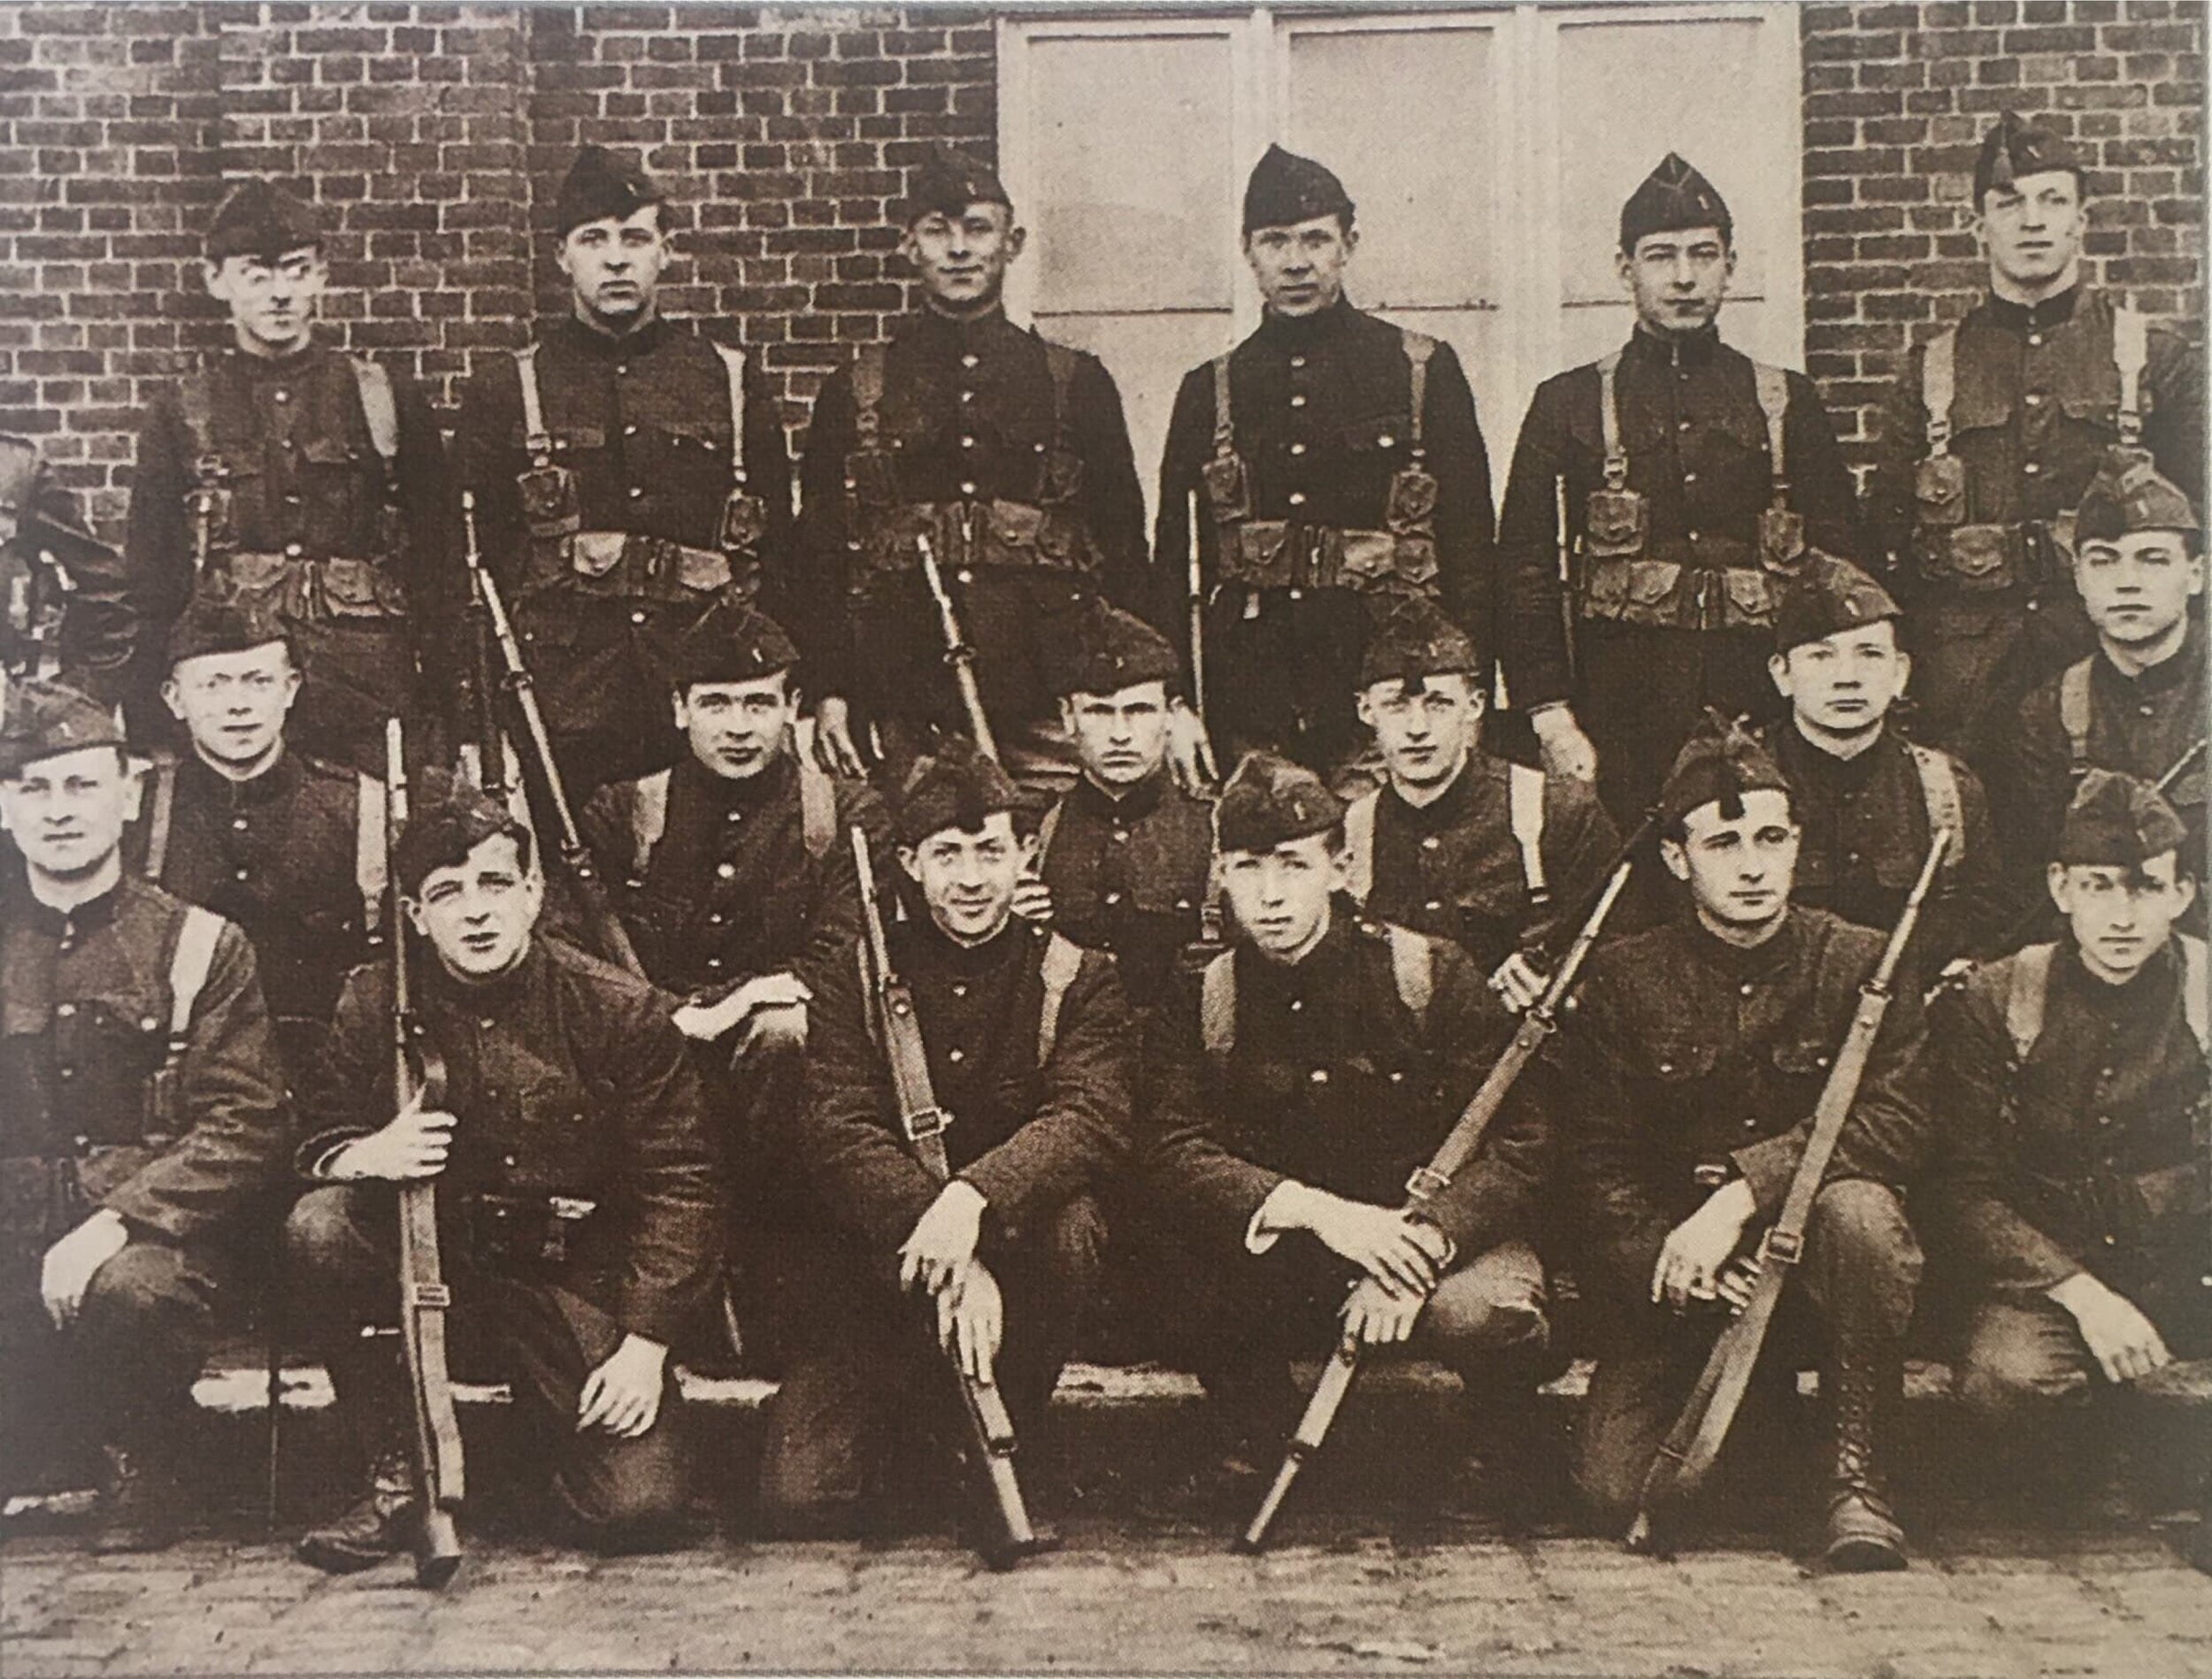  Herge participating in military service (front row, fourth from the left), 1926.  Philippe Goddin.  The Art of Herge : Inventor of Tintin 1907/1937.  Editions Moulinsart, 2008 